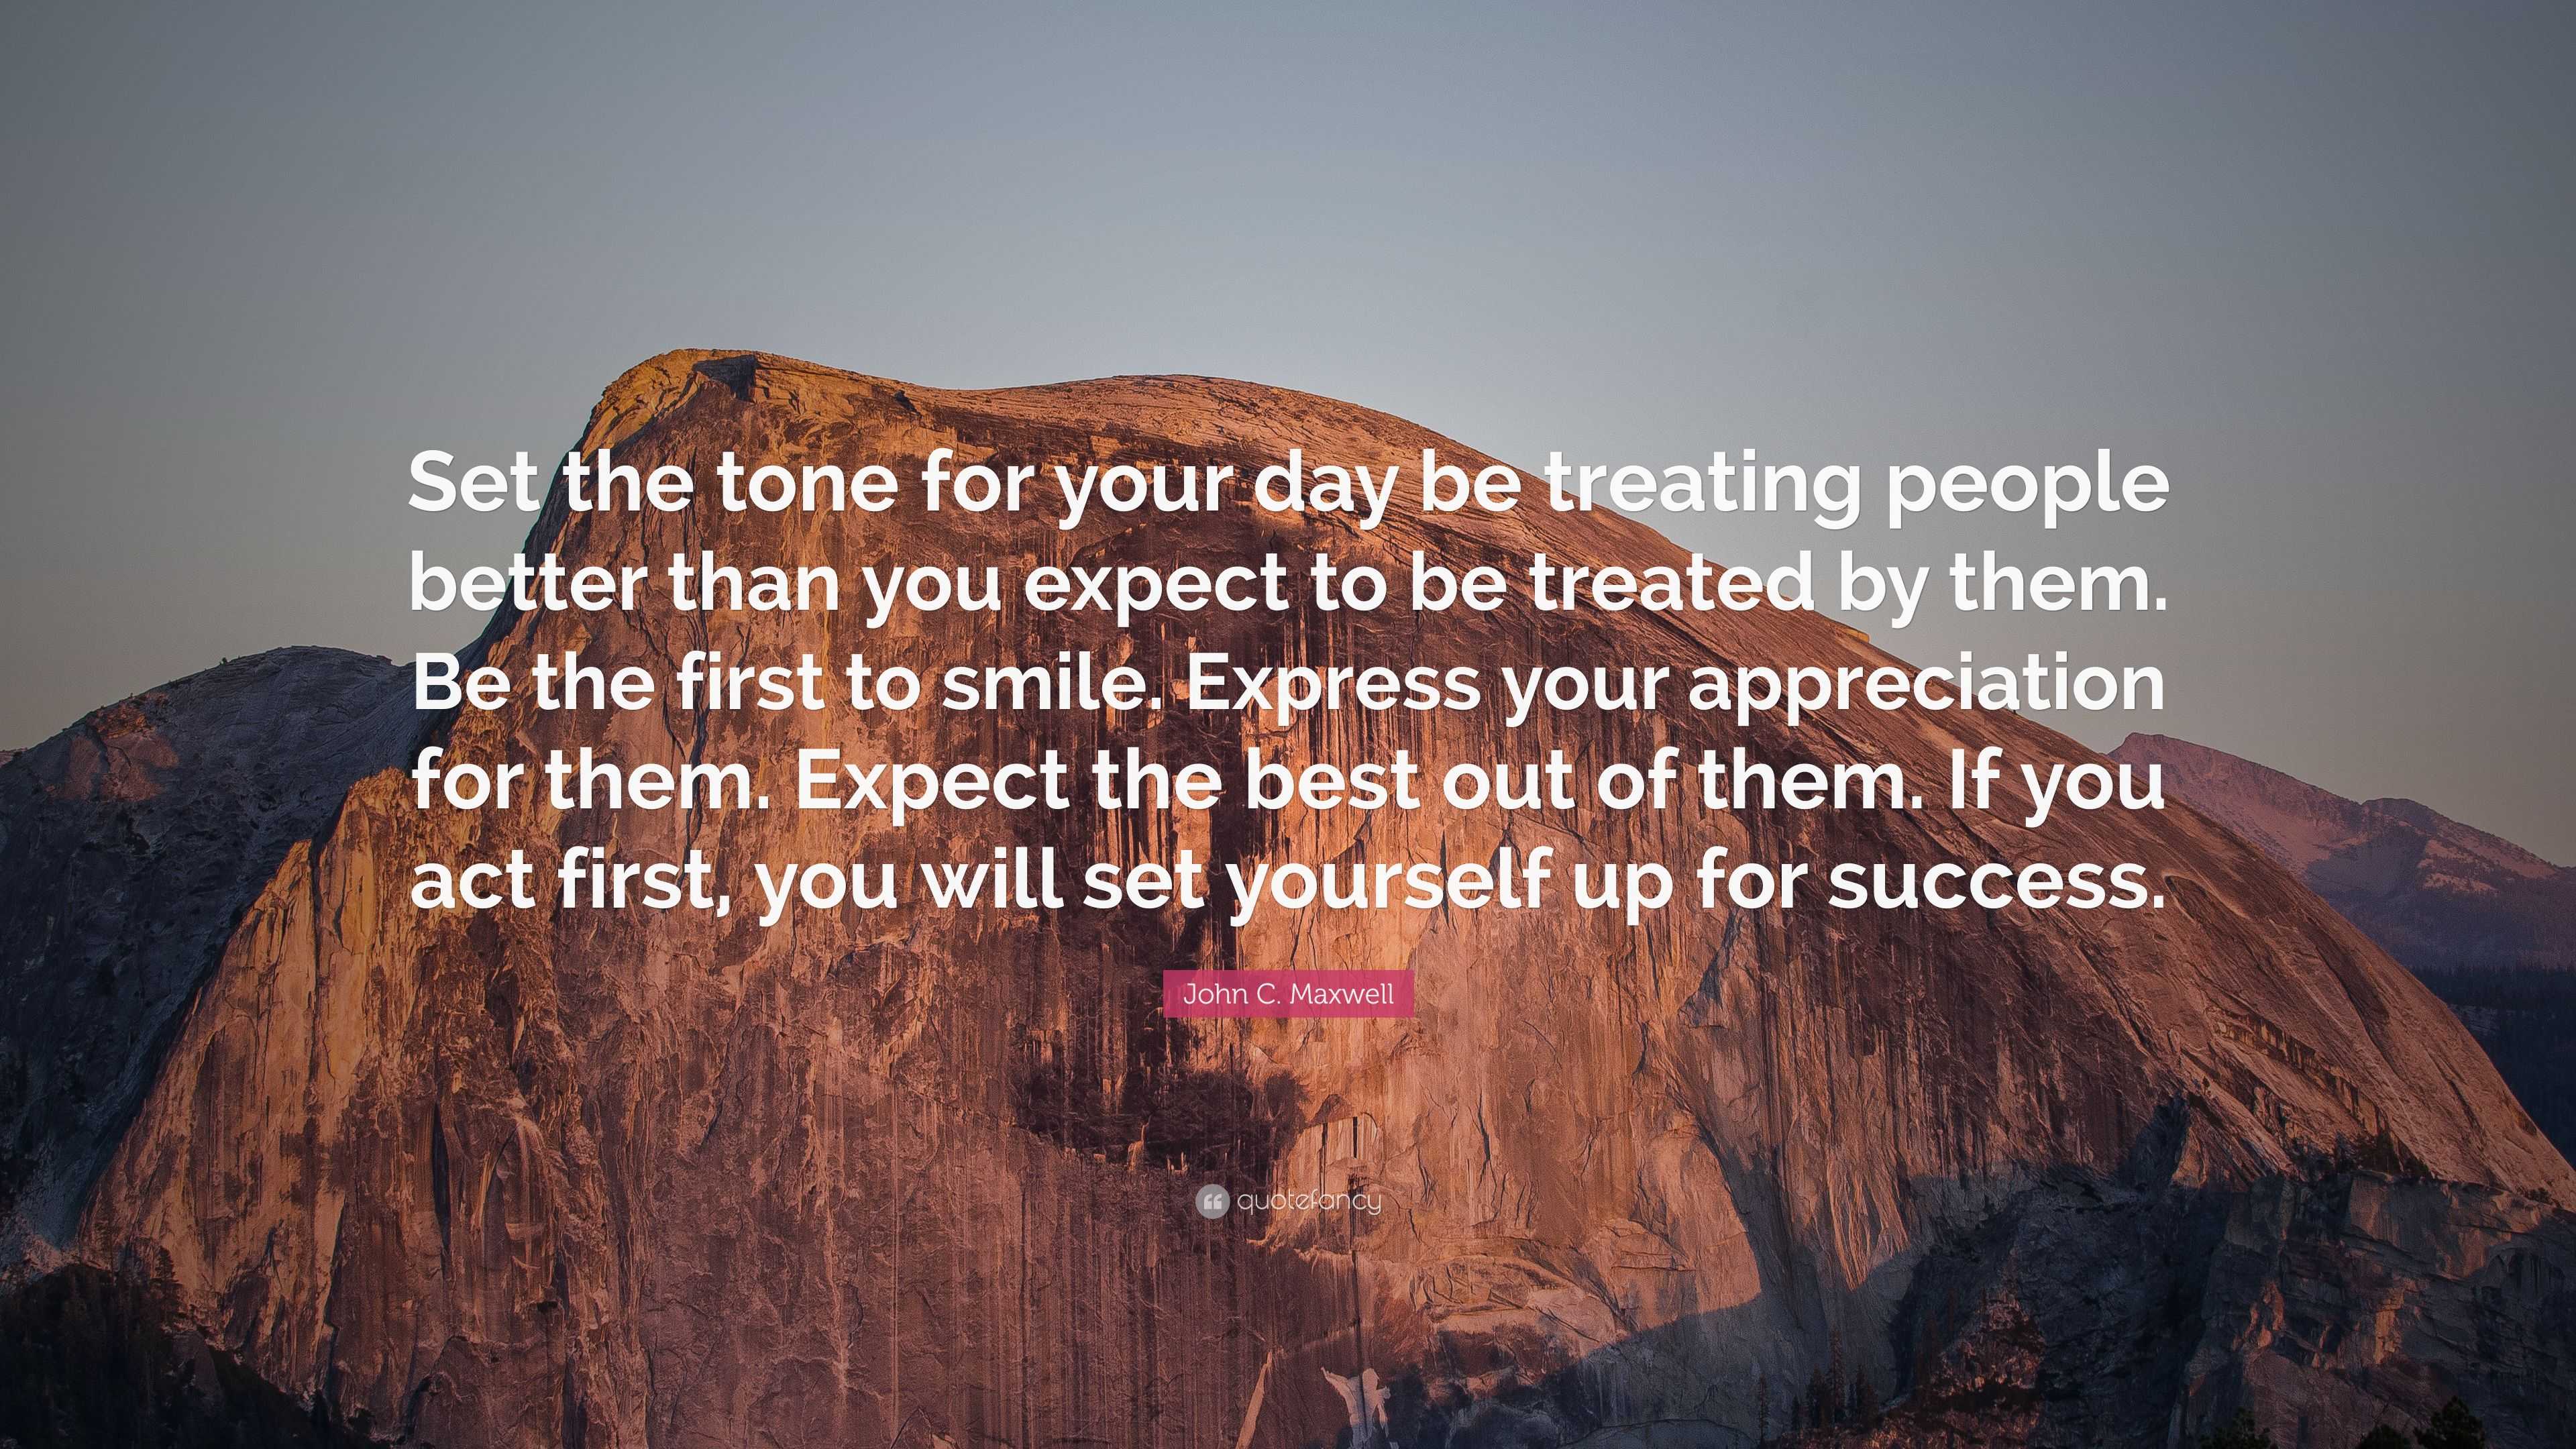 John C. Maxwell Quote: “Set the tone for your day be treating people ...